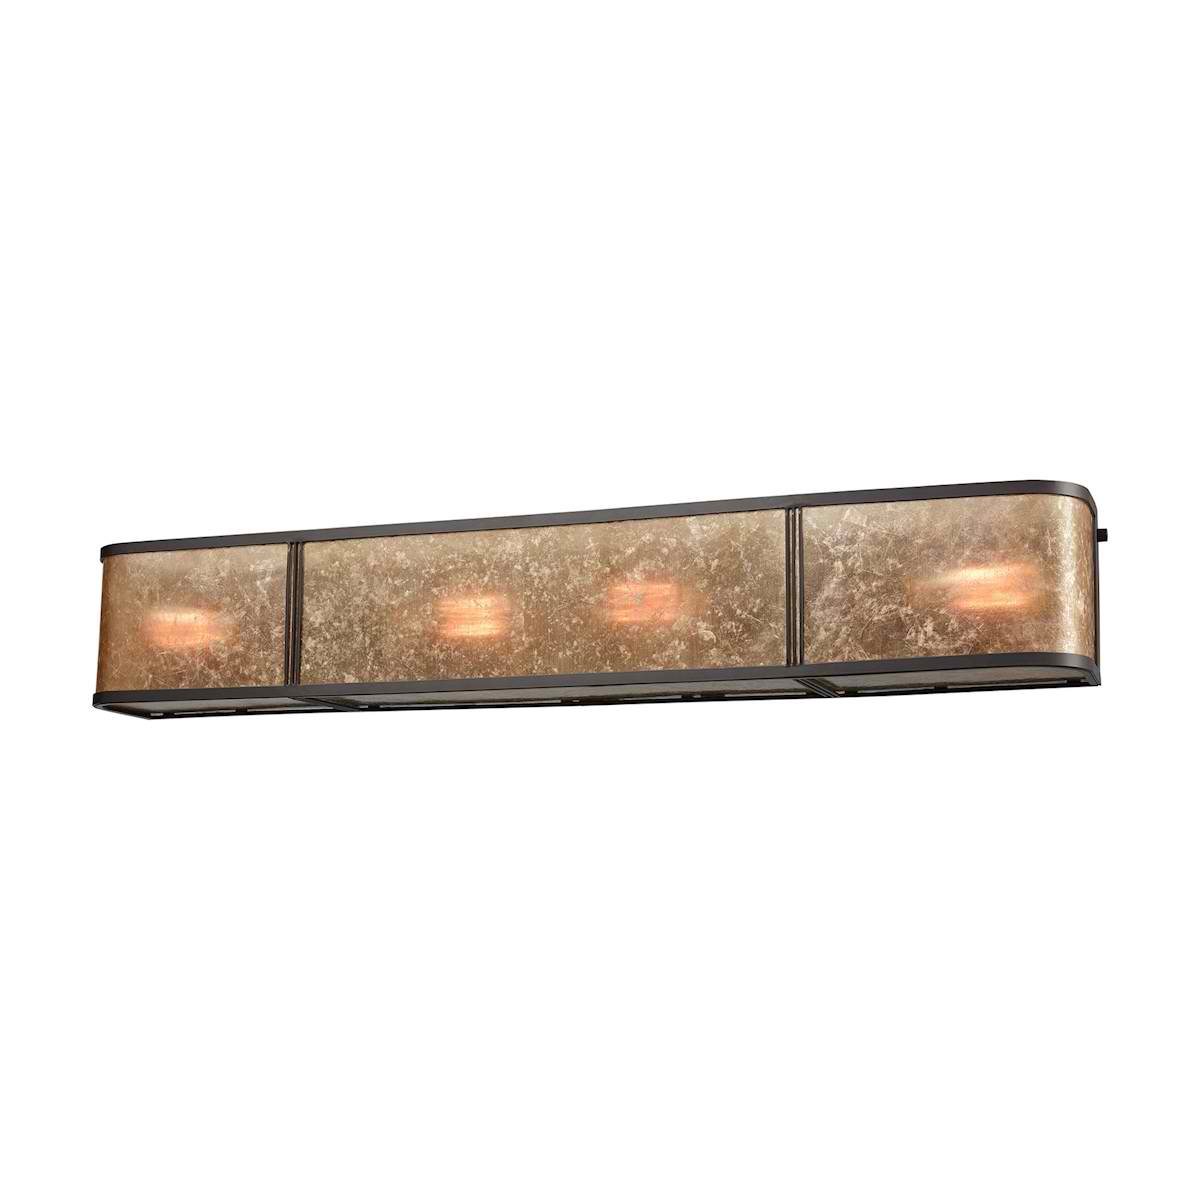 Barringer 4 Light Vanity in Oil Rubbed Bronze with Tan Mica